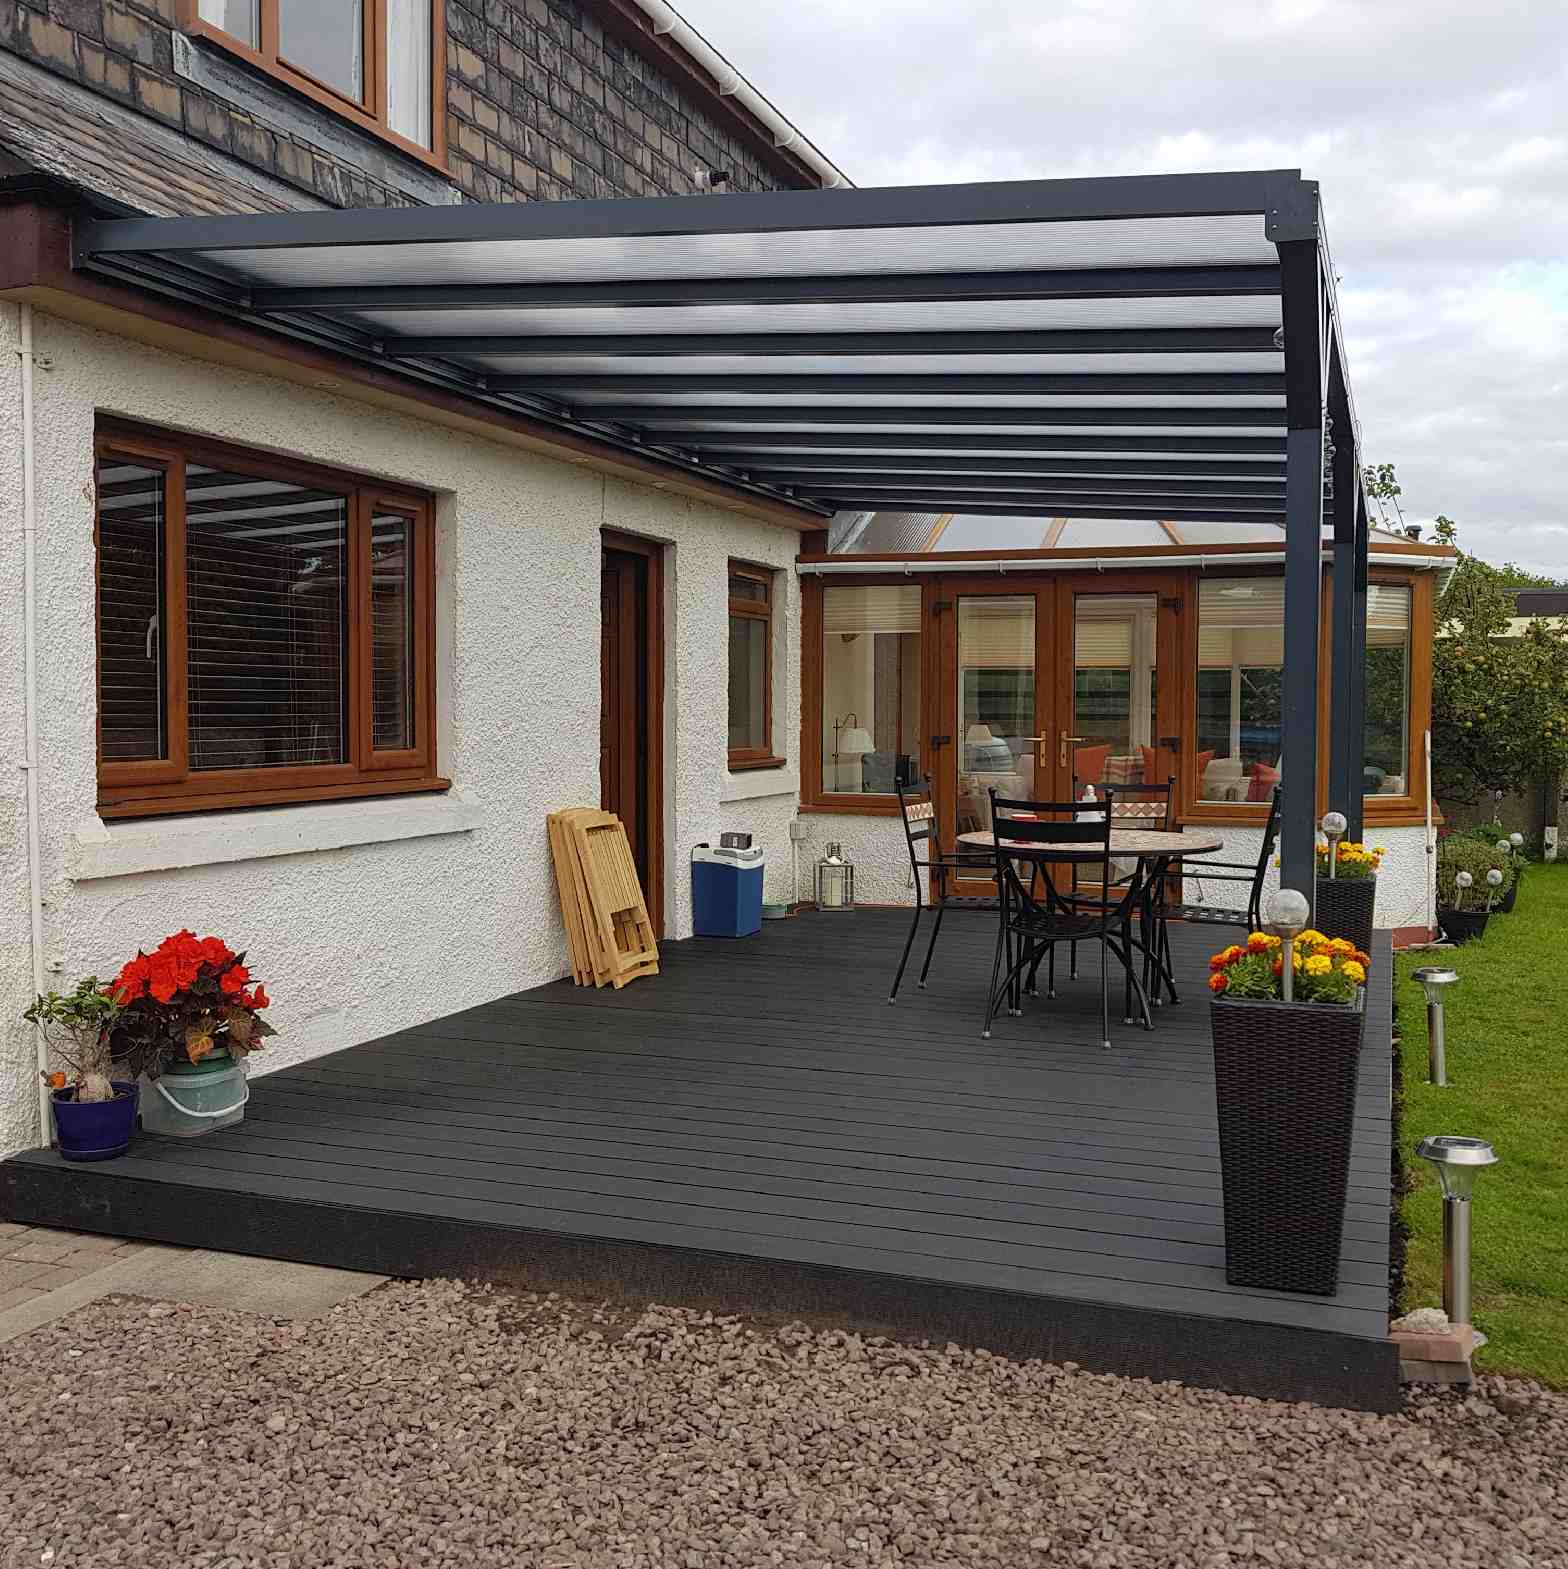 Buy Omega Verandah, Anthracite Grey, 6mm Glass Clear Plate Polycarbonate Glazing - 9.8m (W) x 2.0m (P), (5) Supporting Posts online today